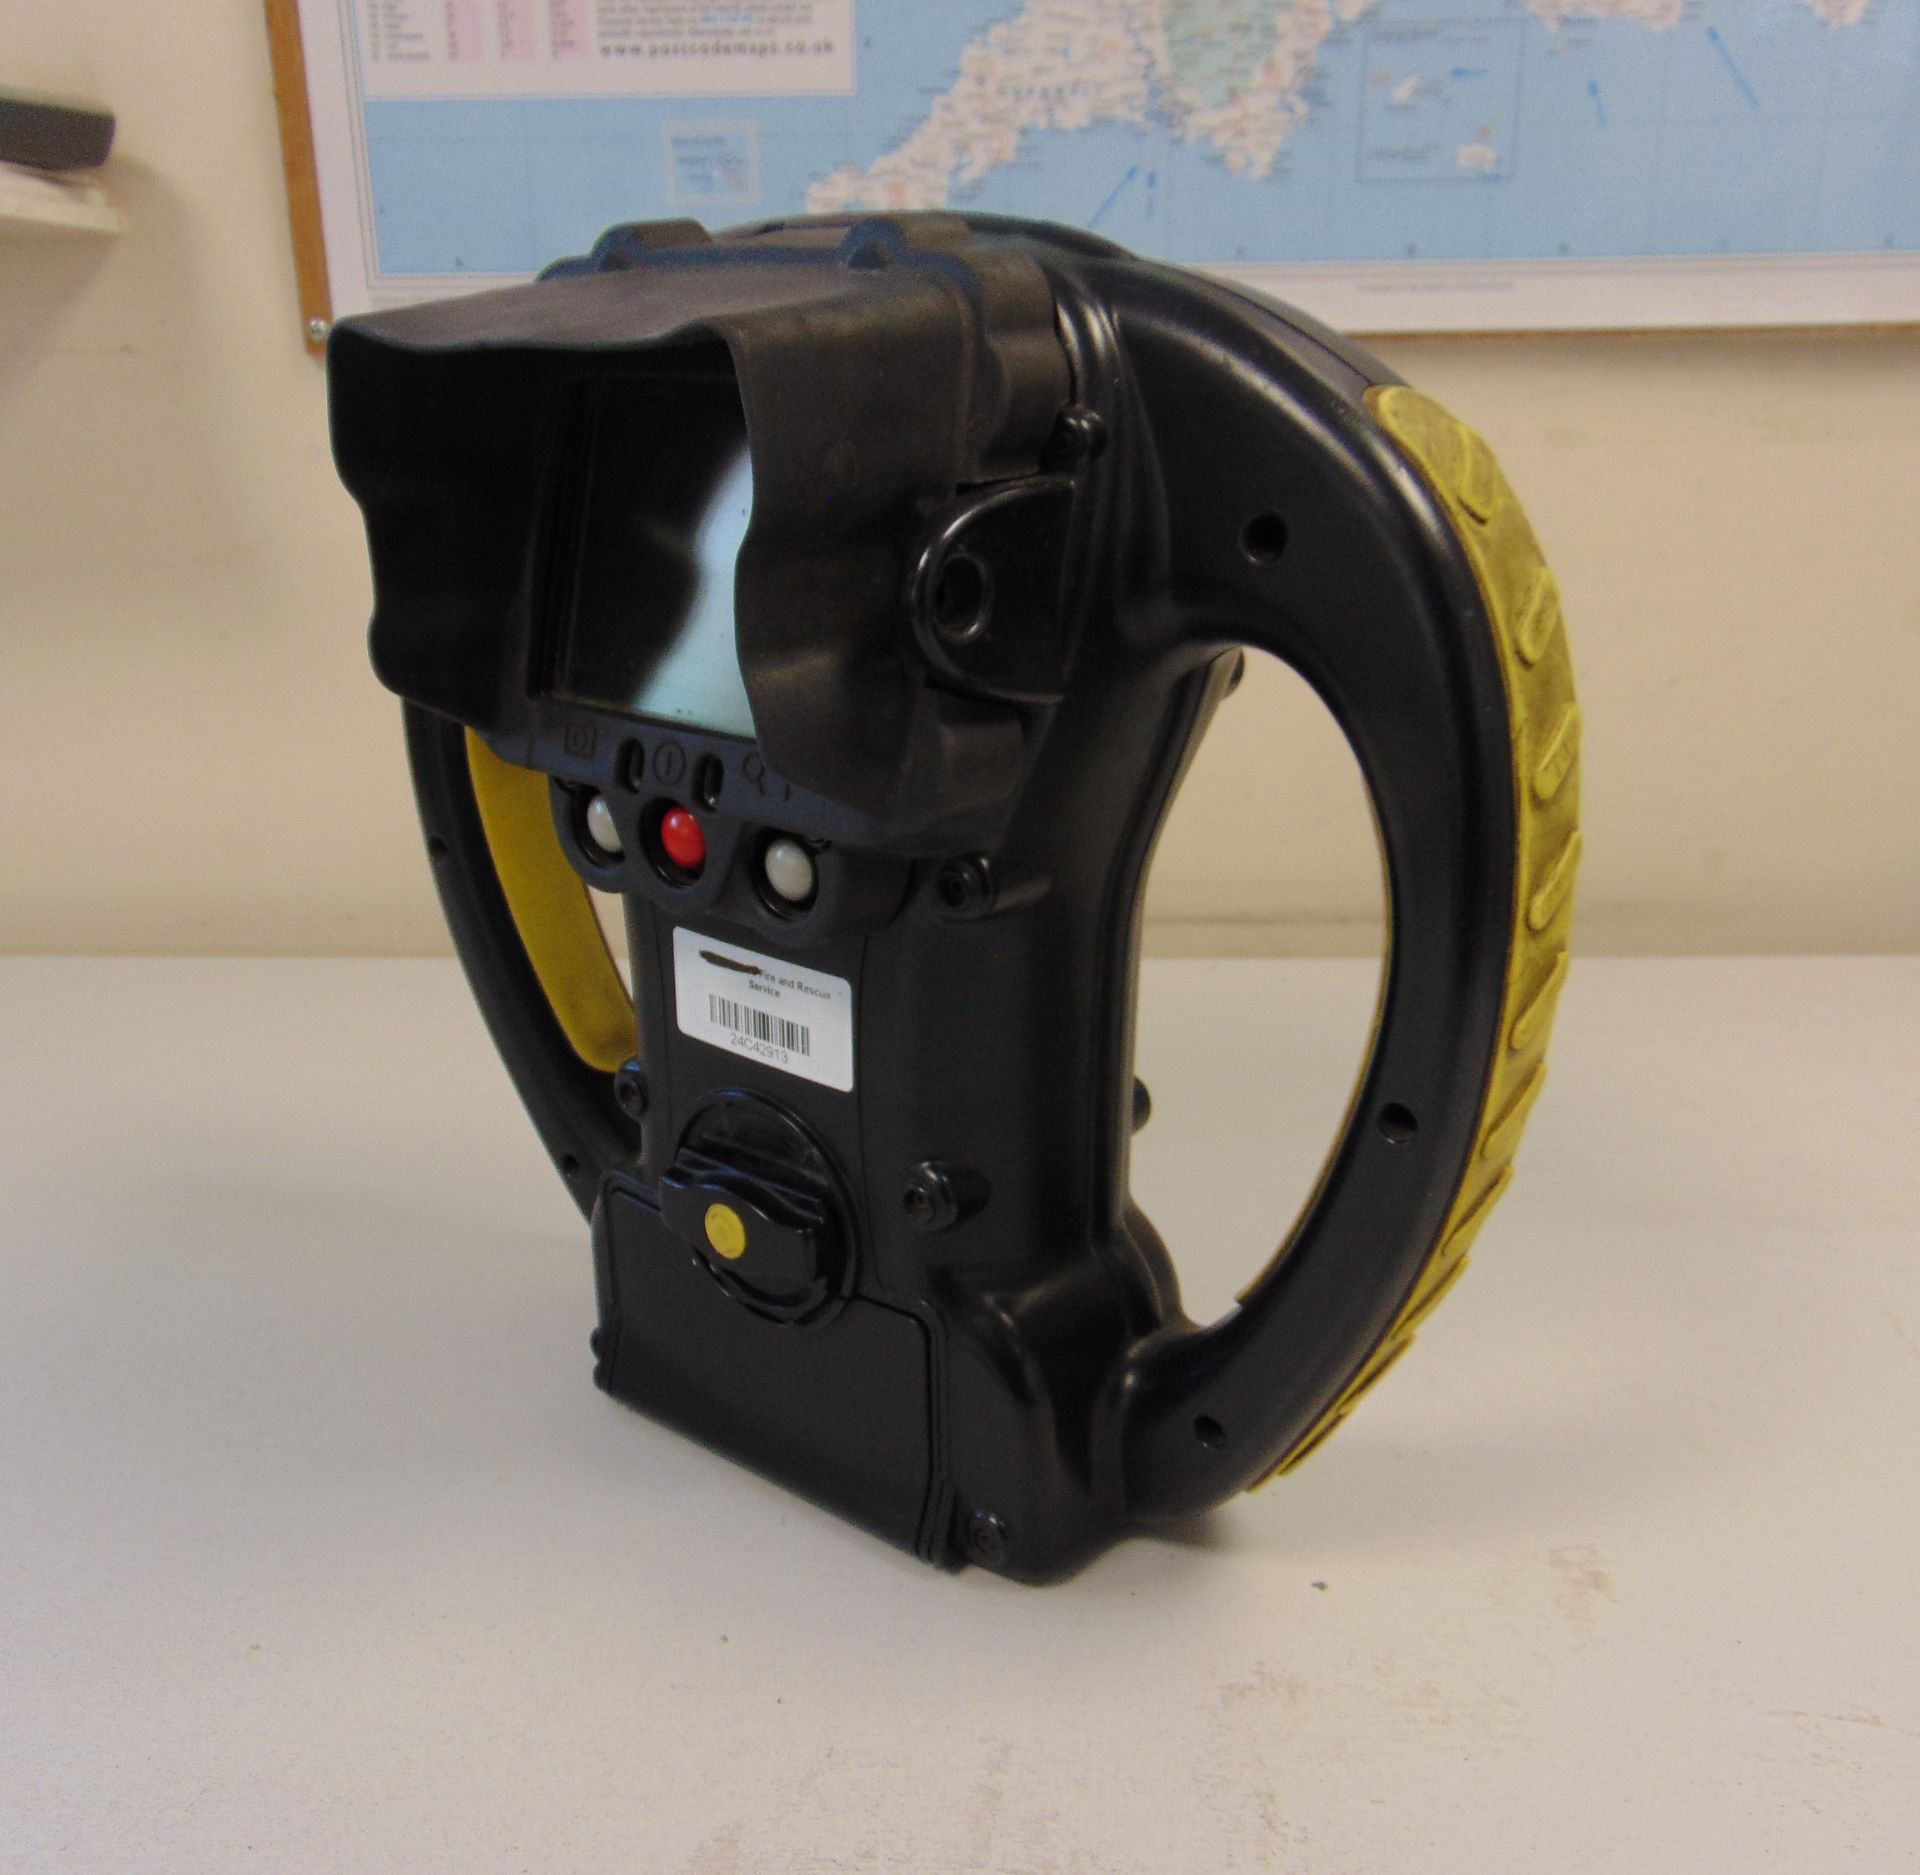 Argus 3 E2V Thermal Imaging Camera w/ Battery & Charger - Image 6 of 6